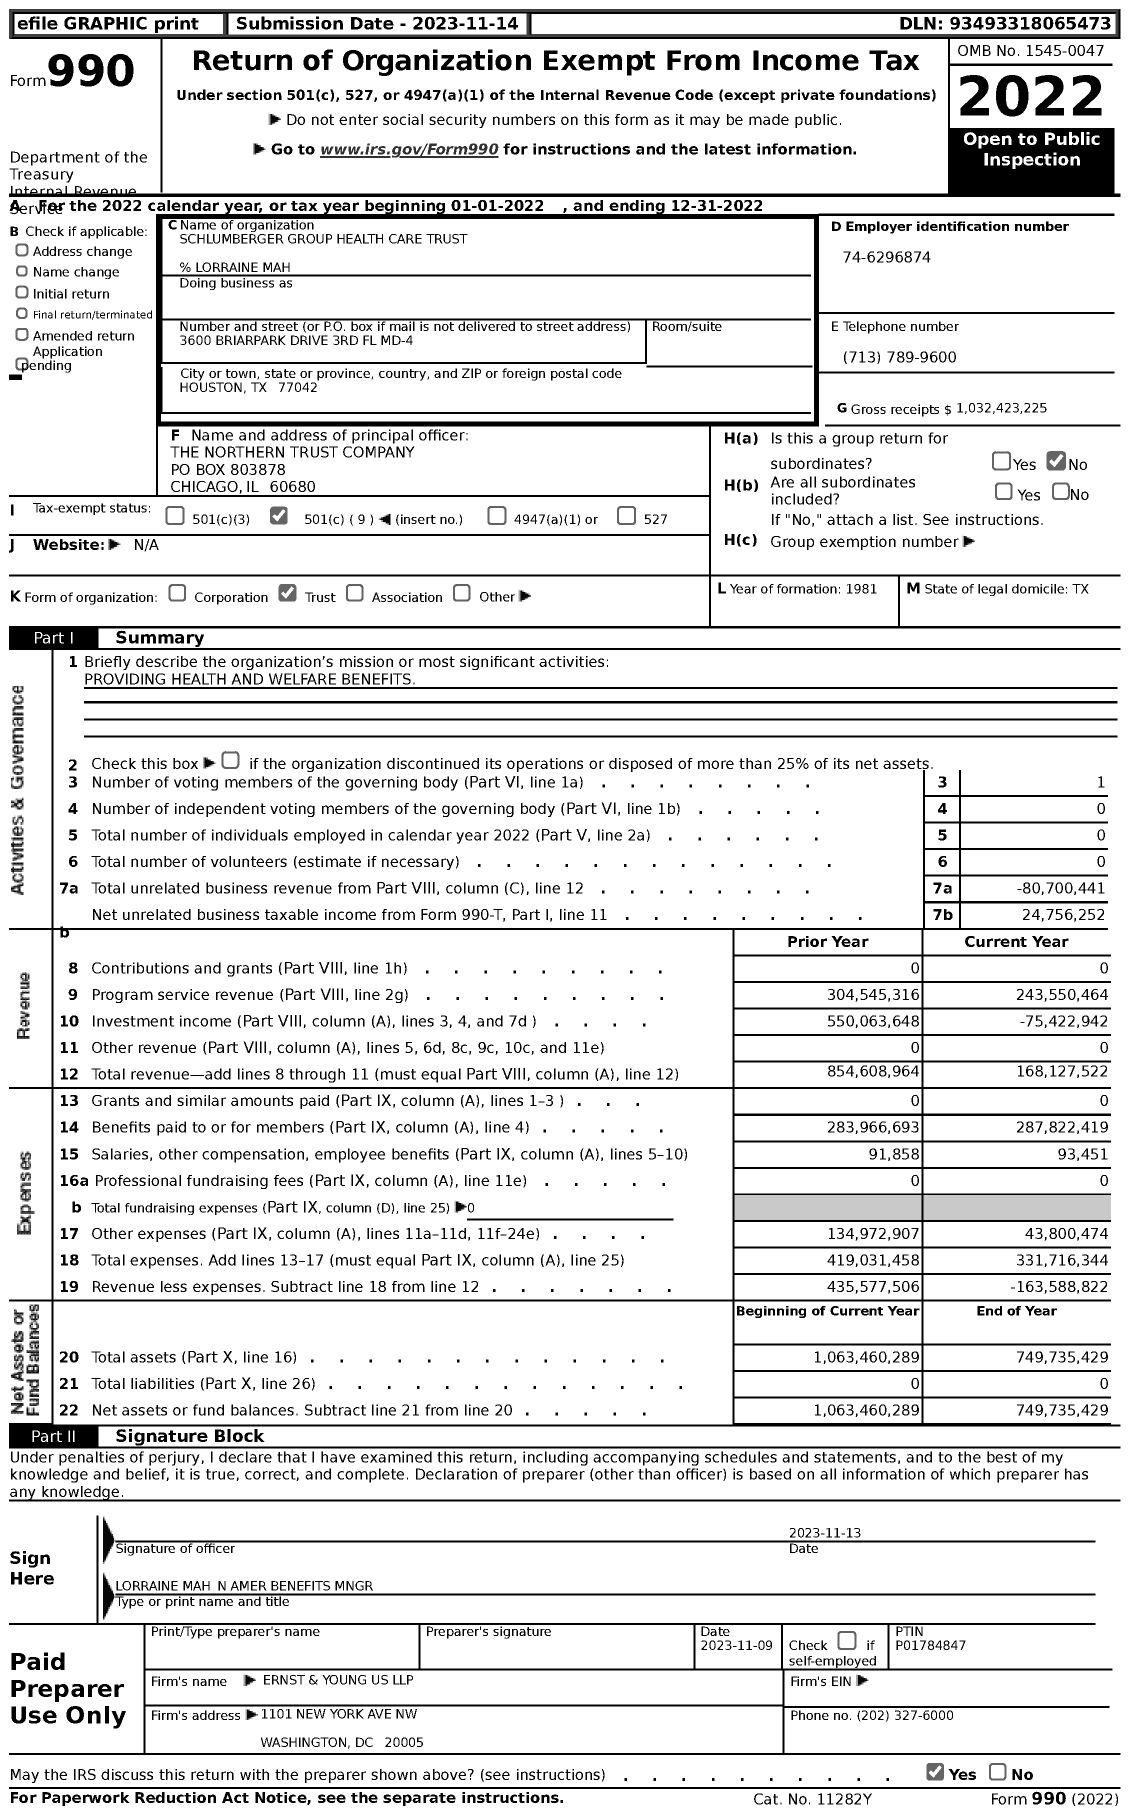 Image of first page of 2022 Form 990 for Sclumberger Group Health Care Trust